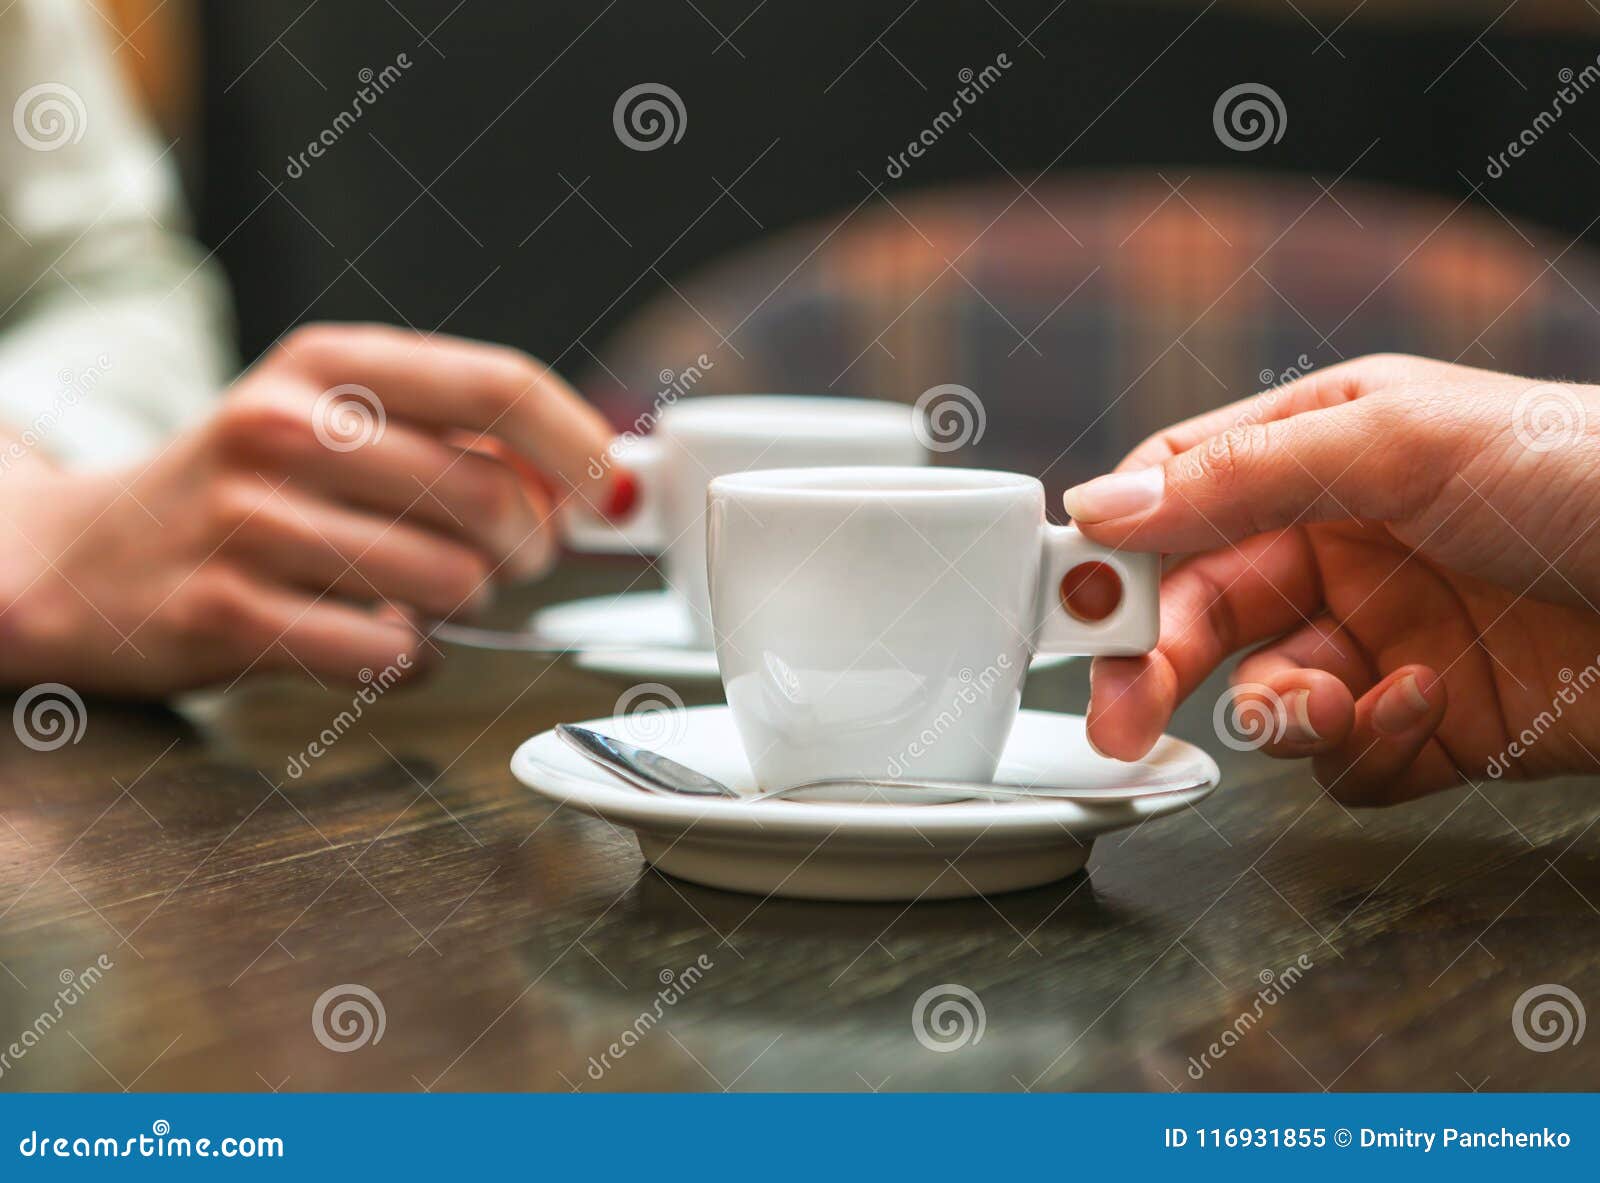 two people holding cups of coffee sitting in cafeteria.